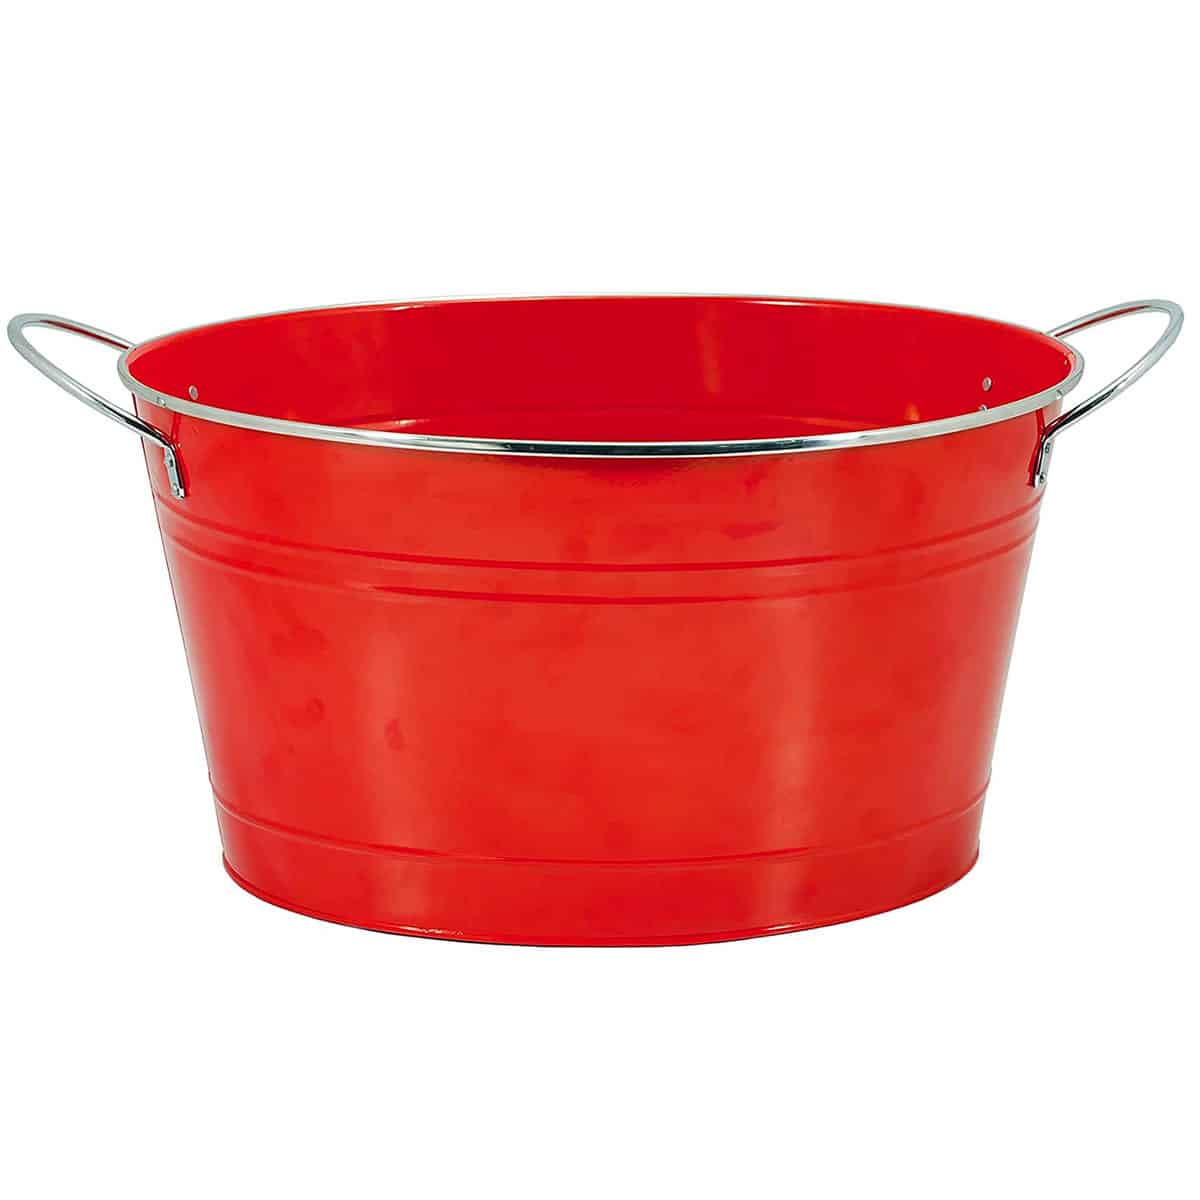 Red metal tub with handles